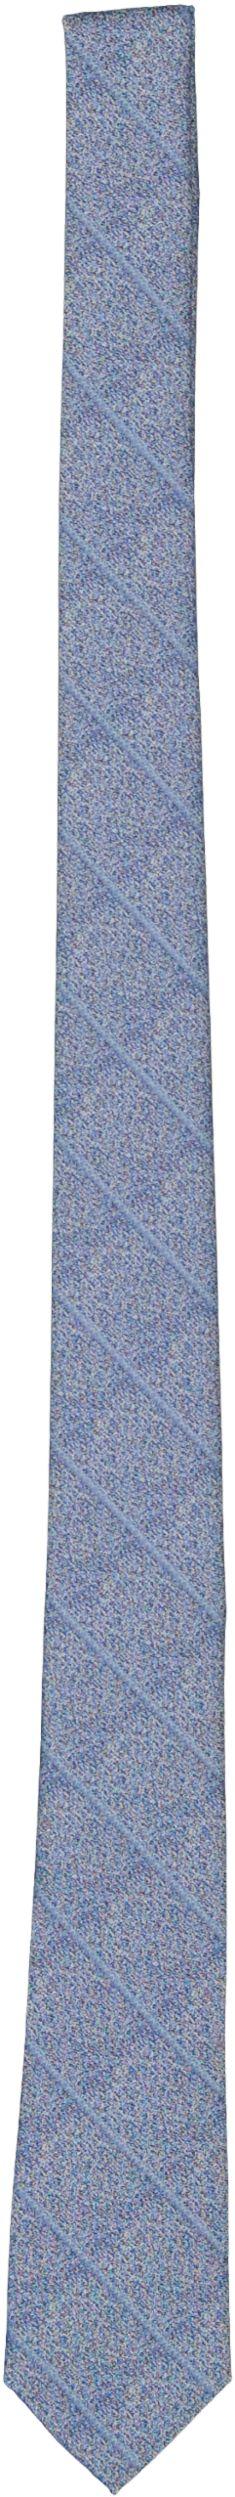 T.O. Collection Mens Necktie - TO234